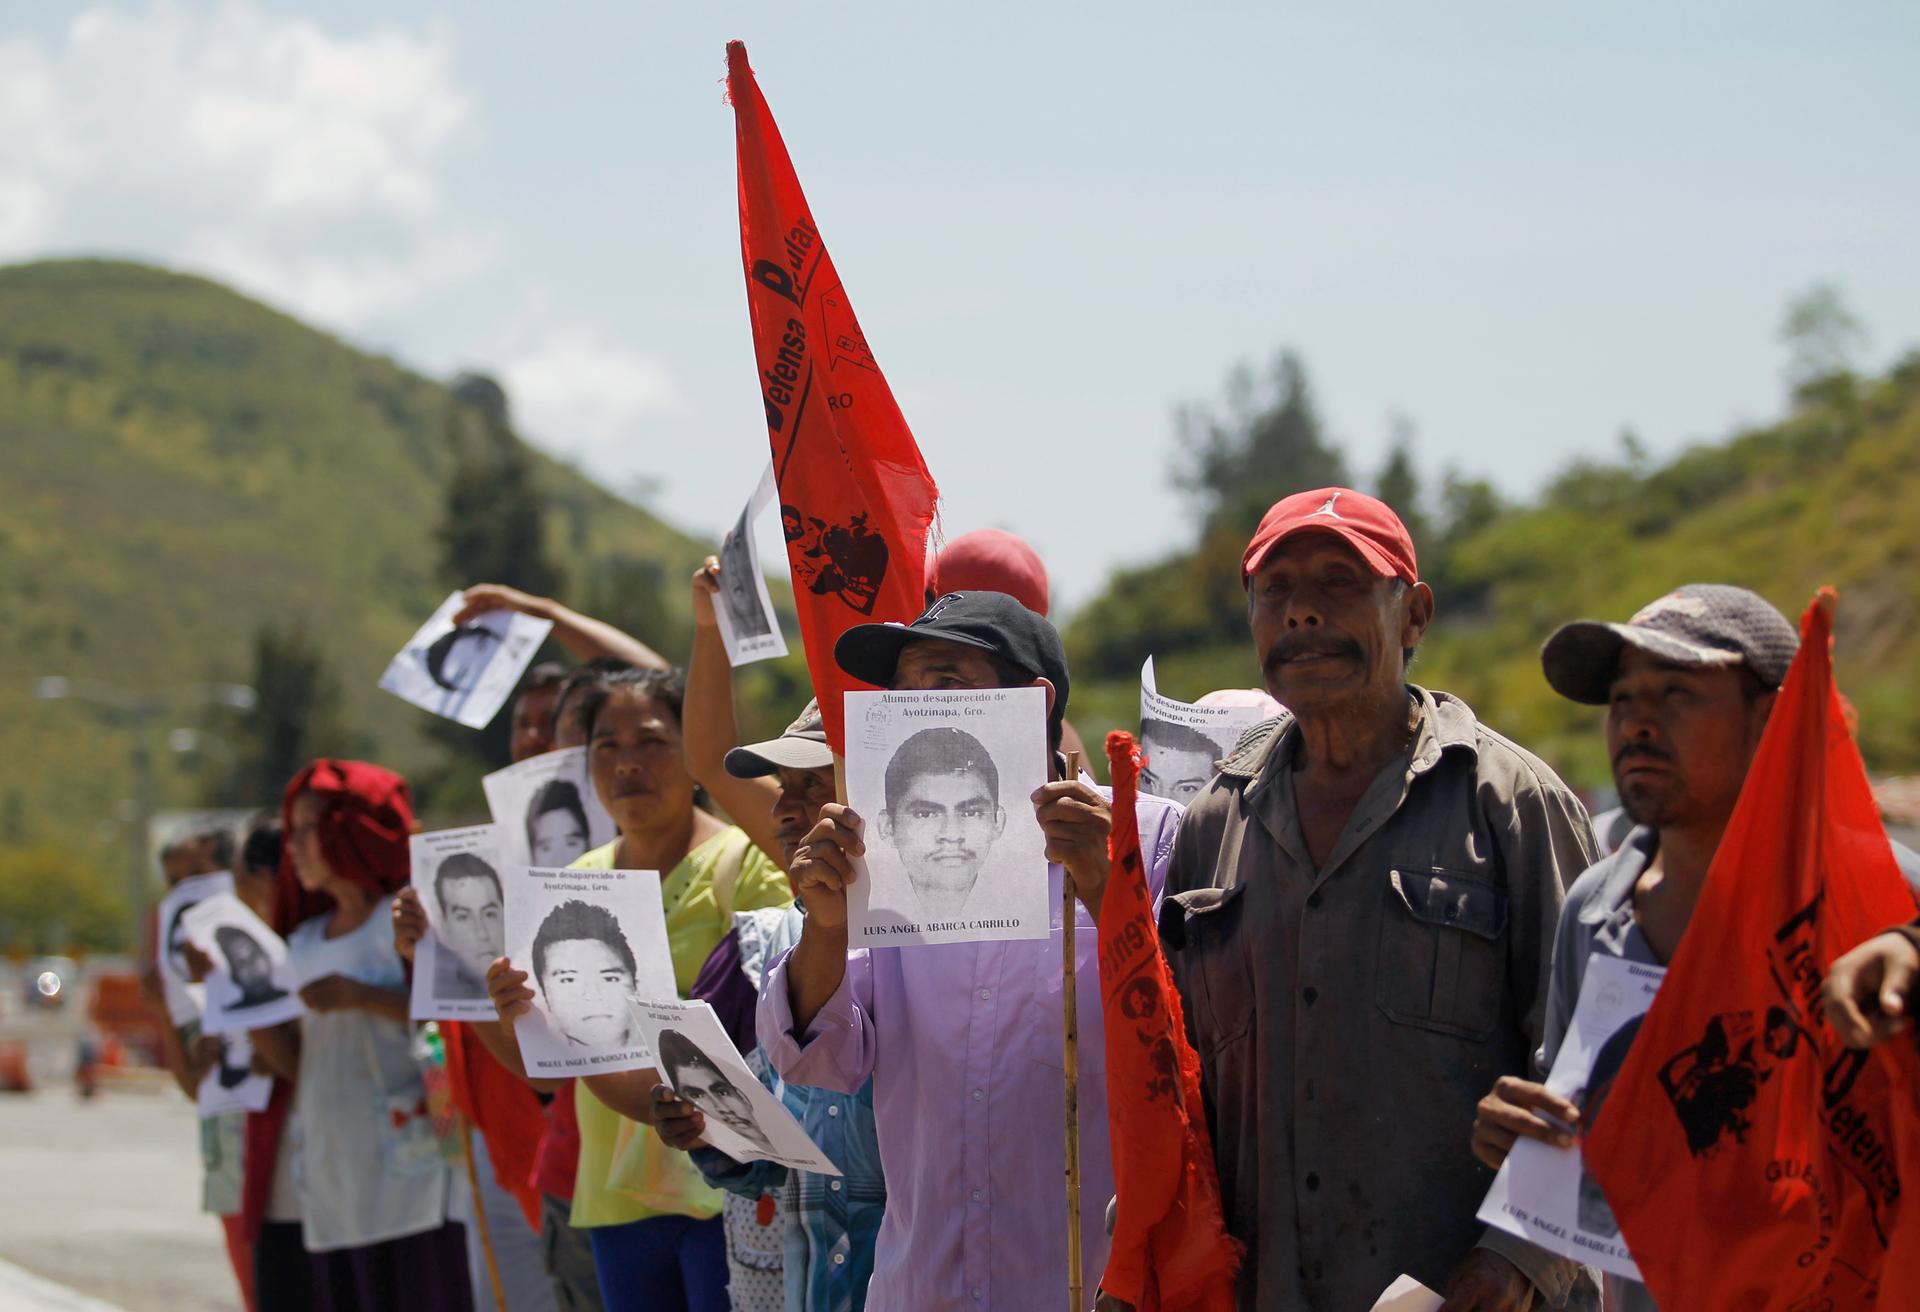 Relatives hold pictures of missing students during a demonstration demanding their safe return on the outskirts of Chilpancingo, Mexico, on October 7, 2014.